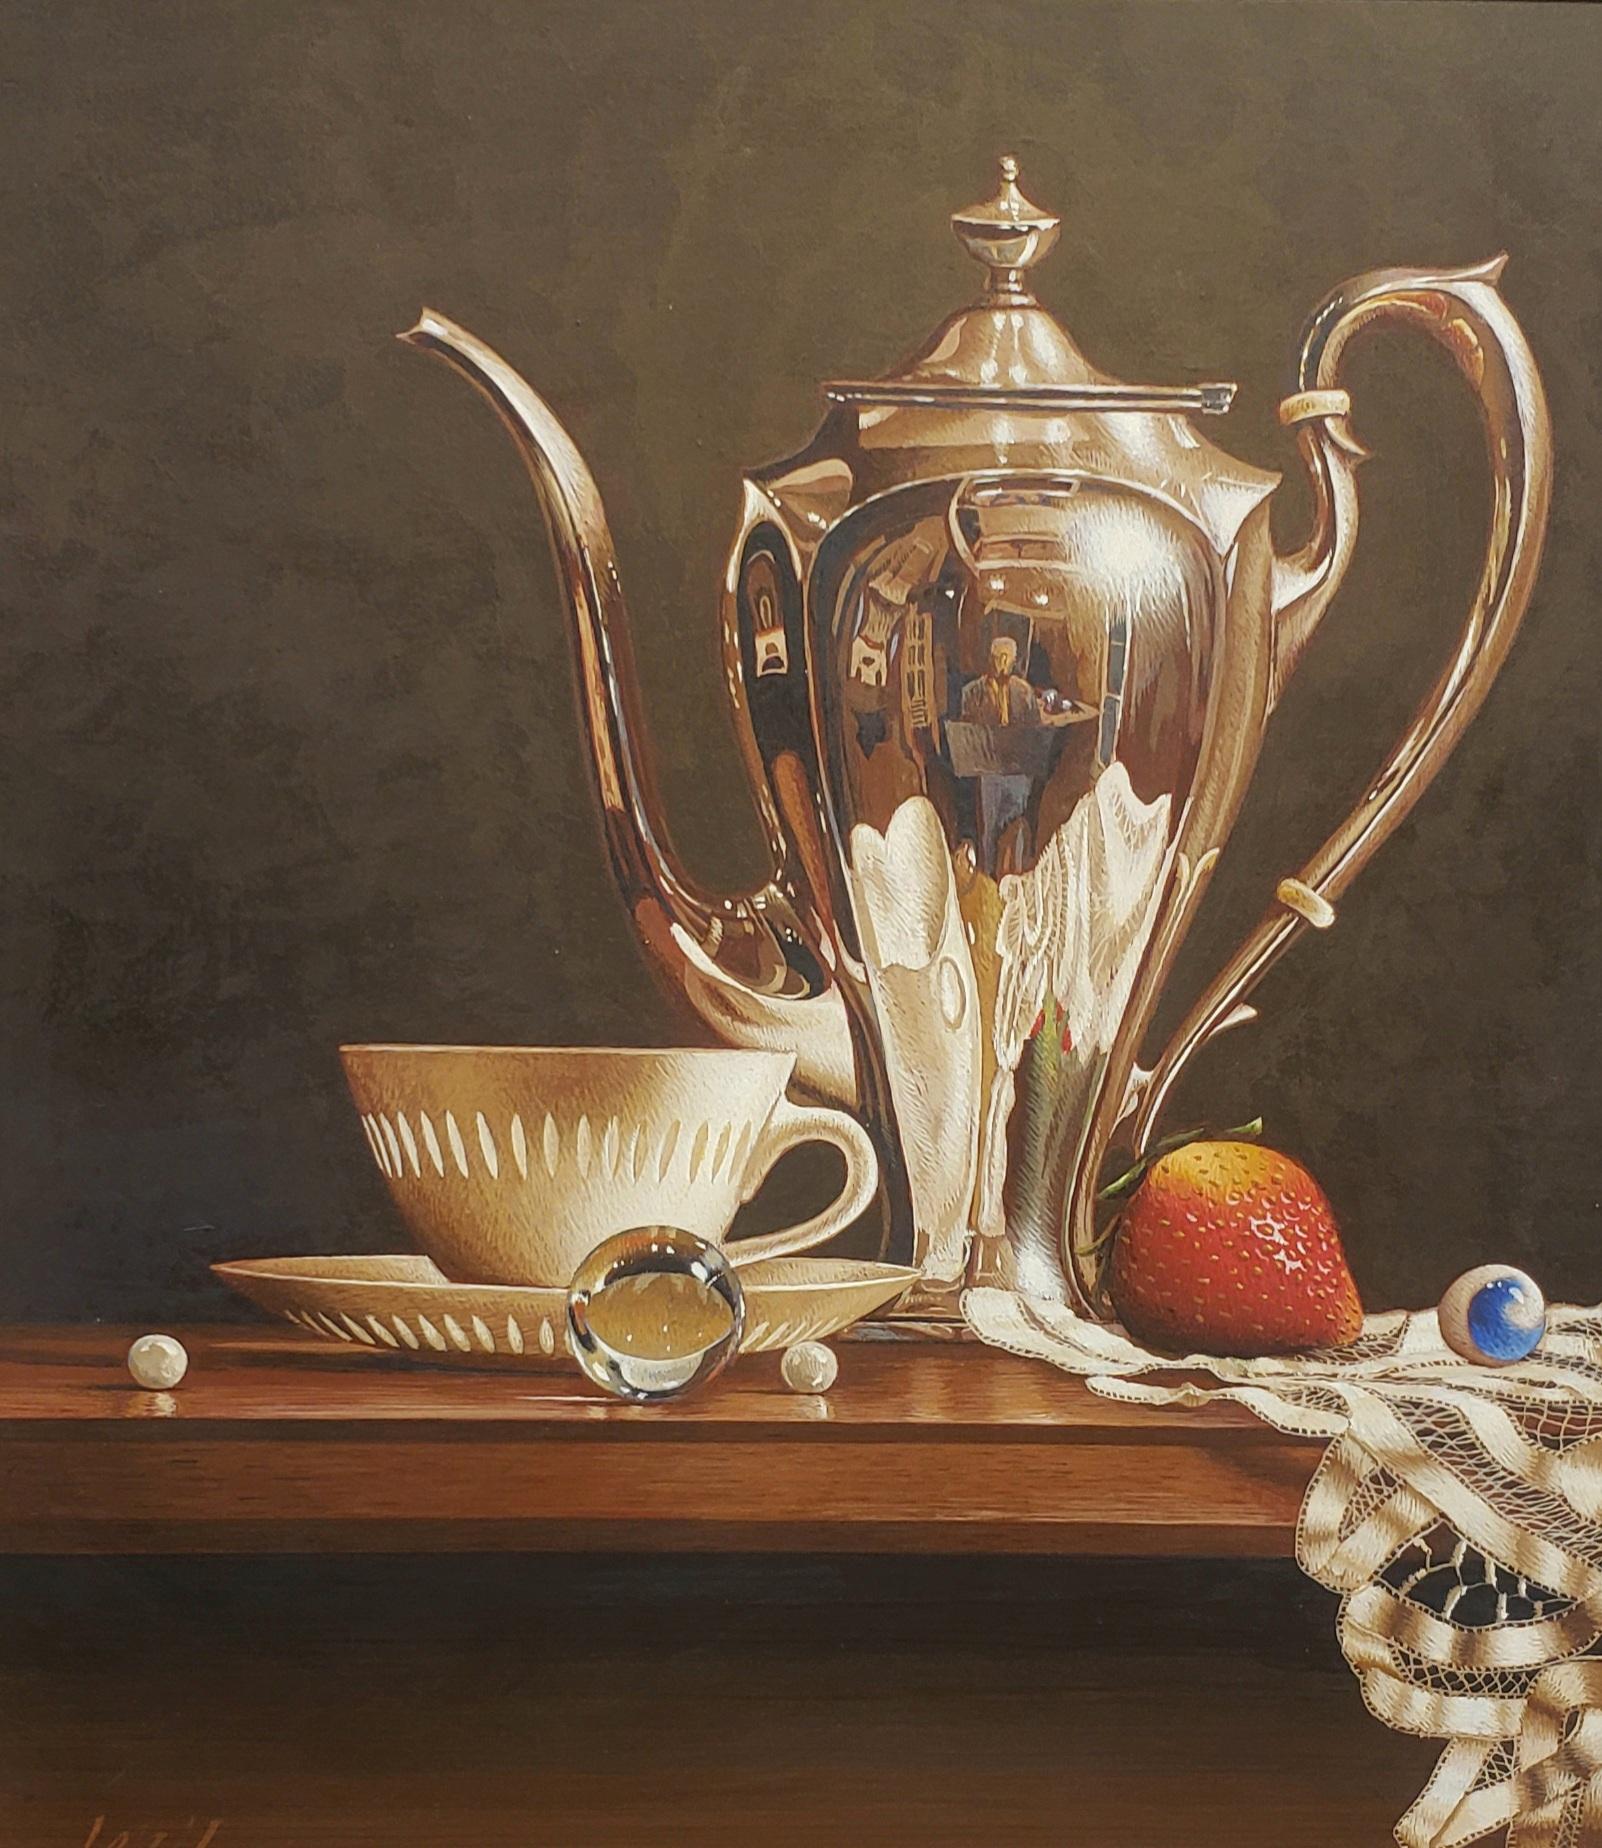   Coffee Cup w/Pearl, Egg Tempera,  Realism,  3D Appearance, American Artist